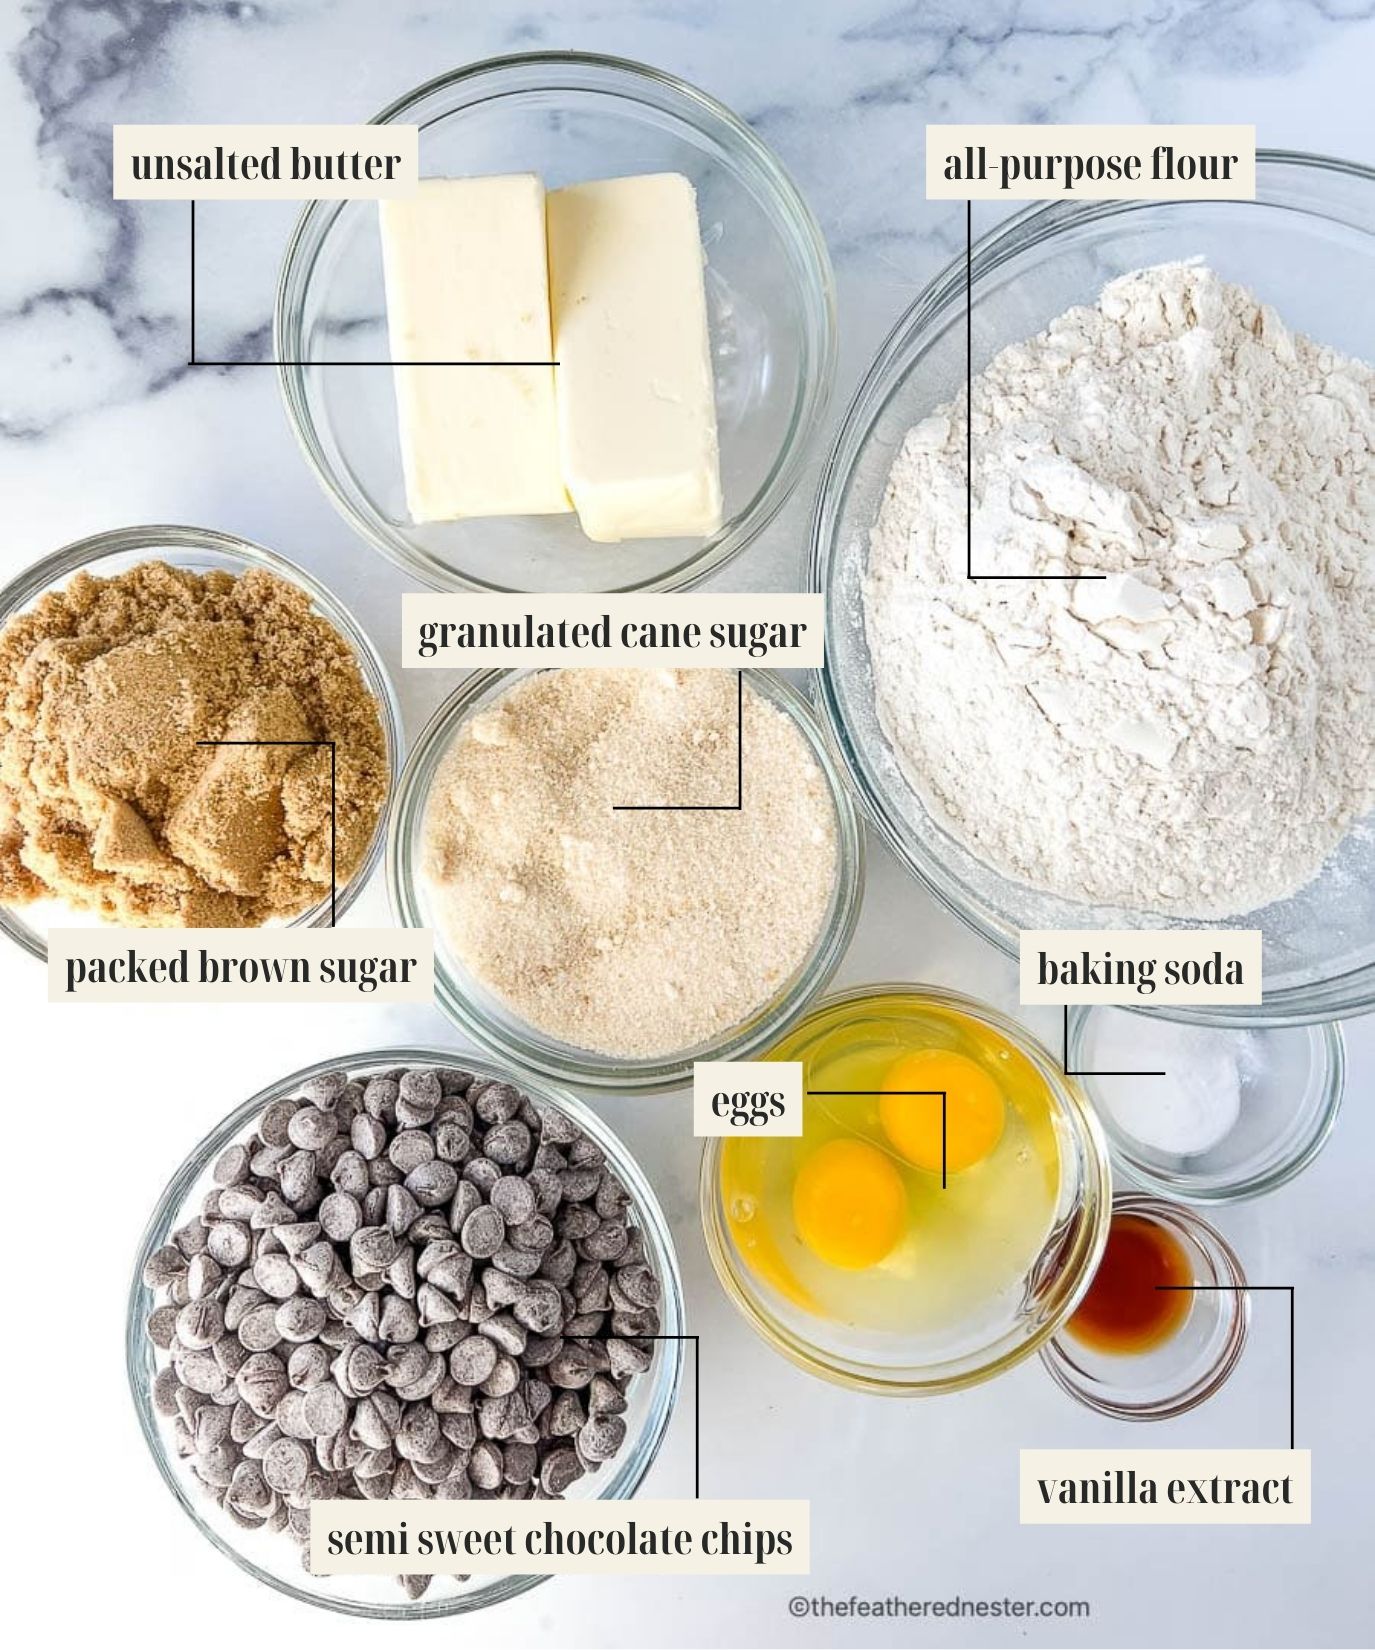 Labeled ingredients for chocolate chip cookies.